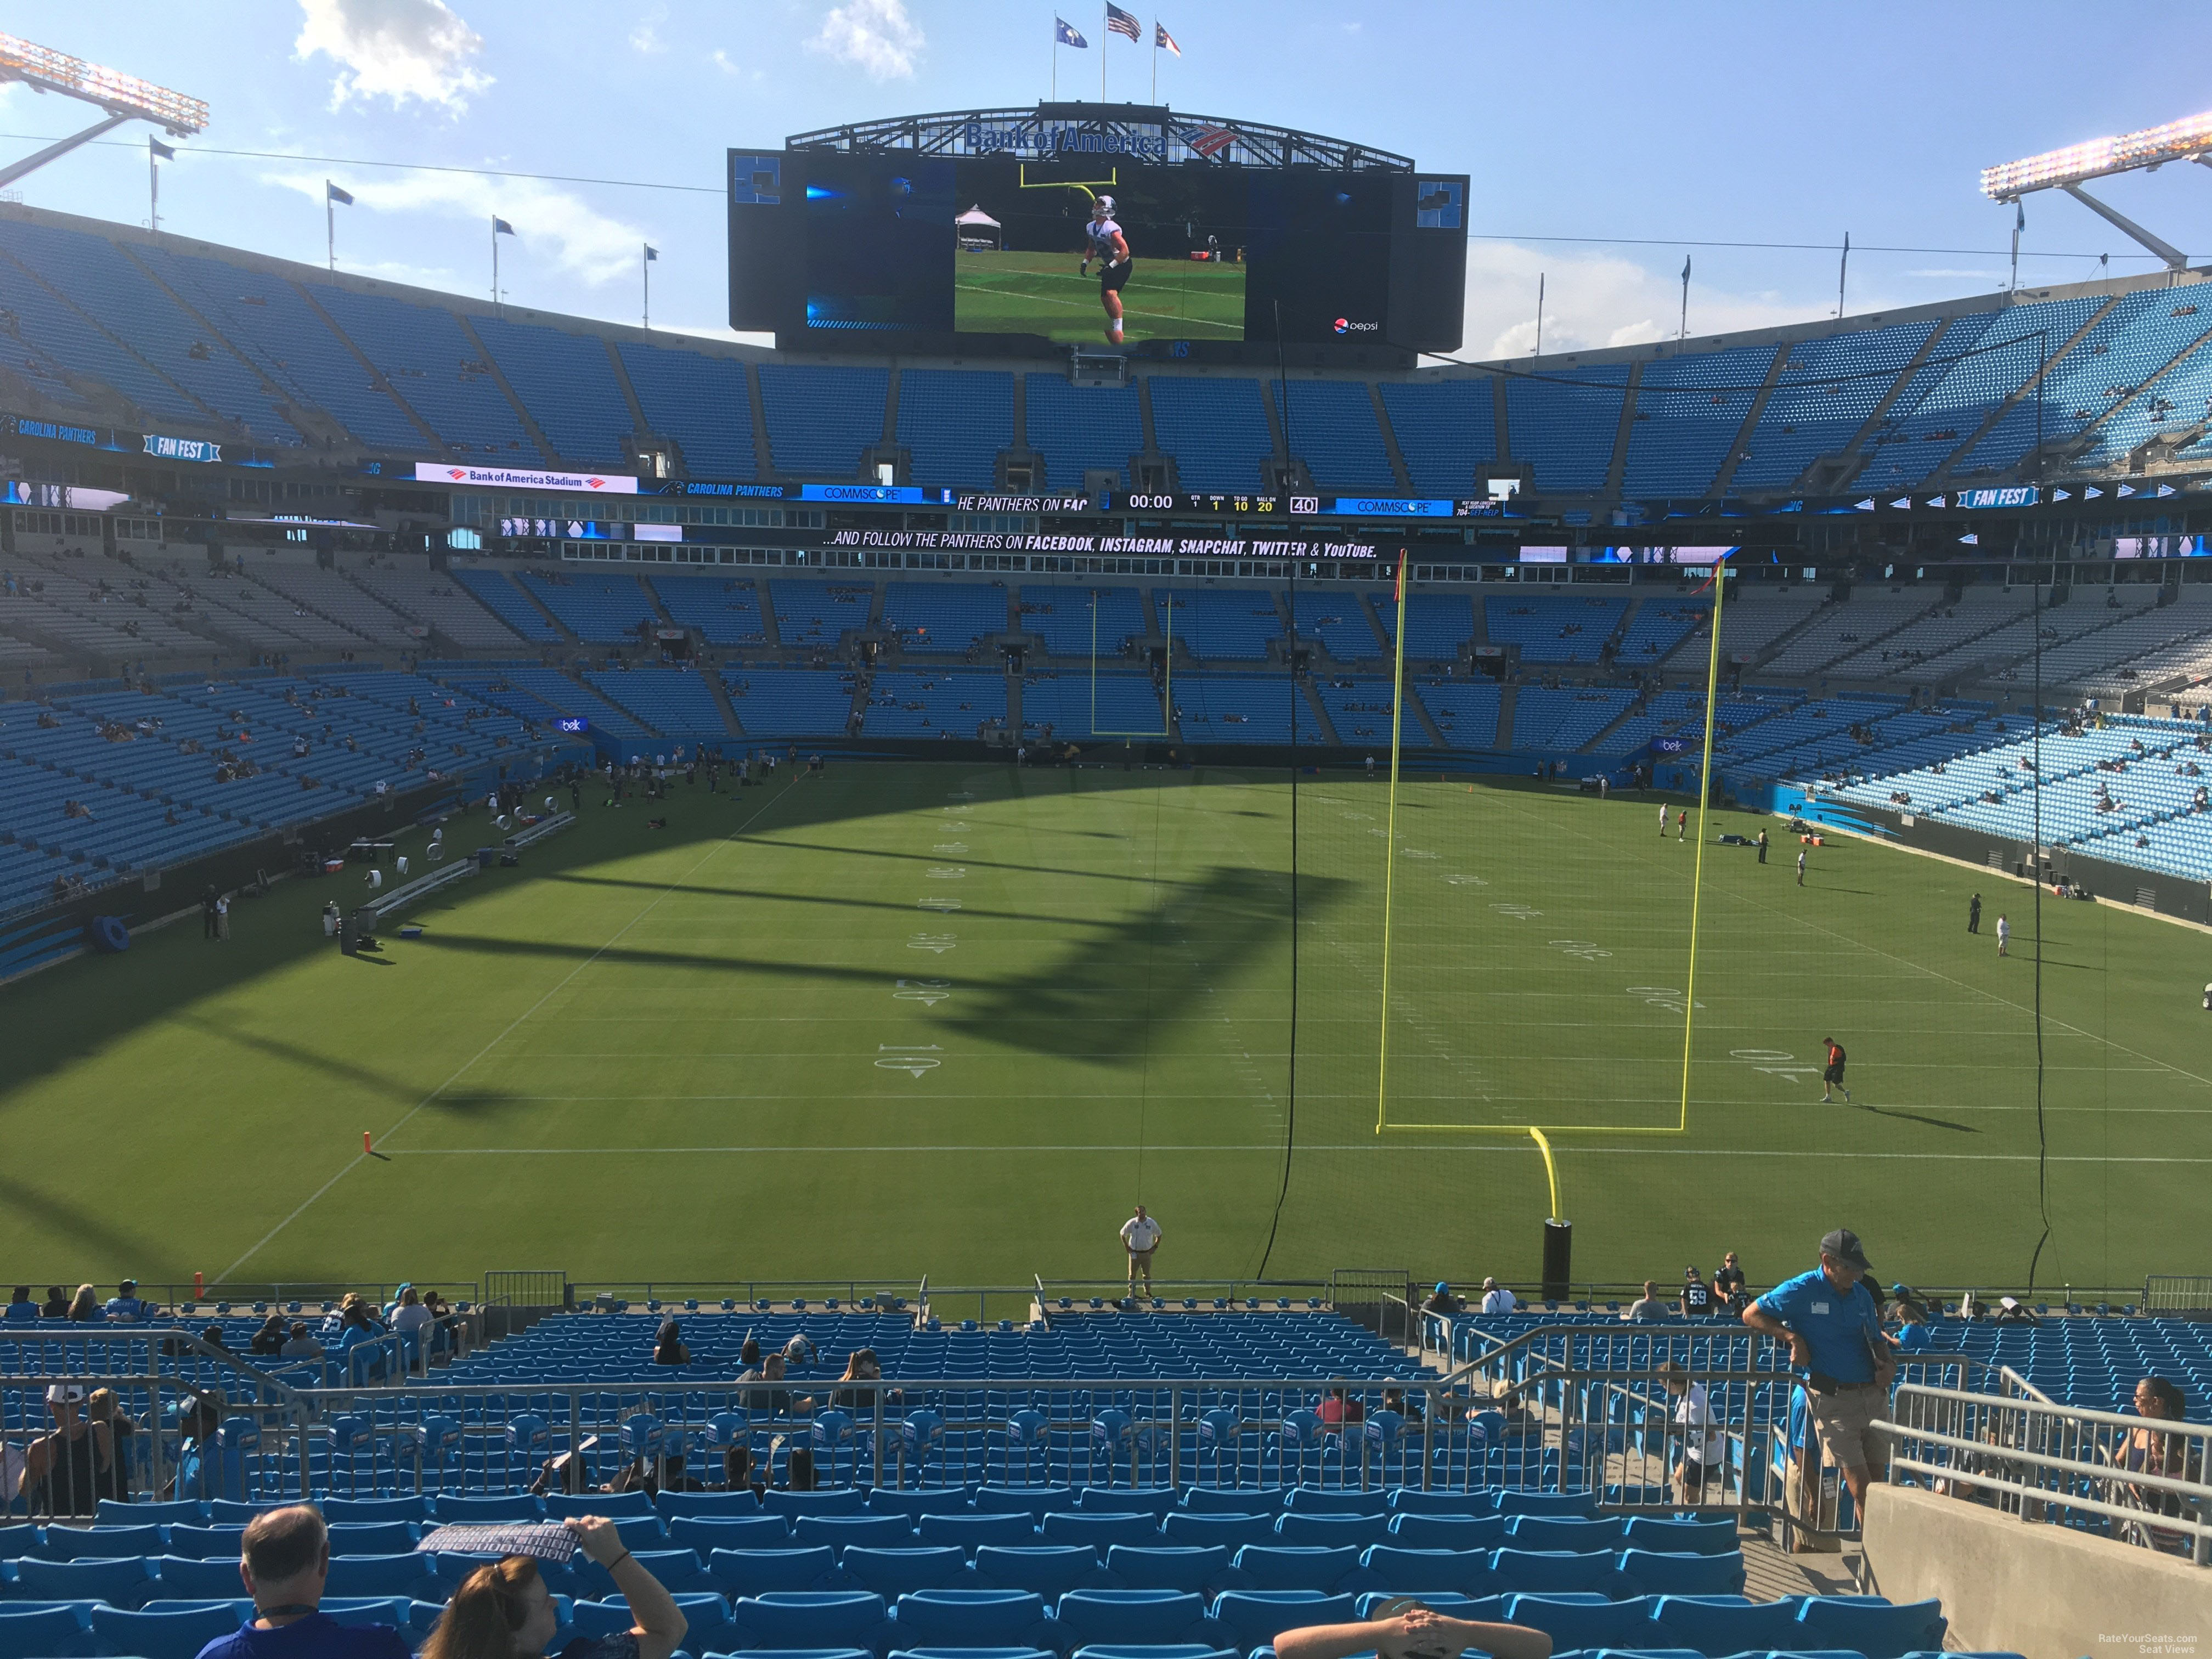 section 230, row 10 seat view  for football - bank of america stadium